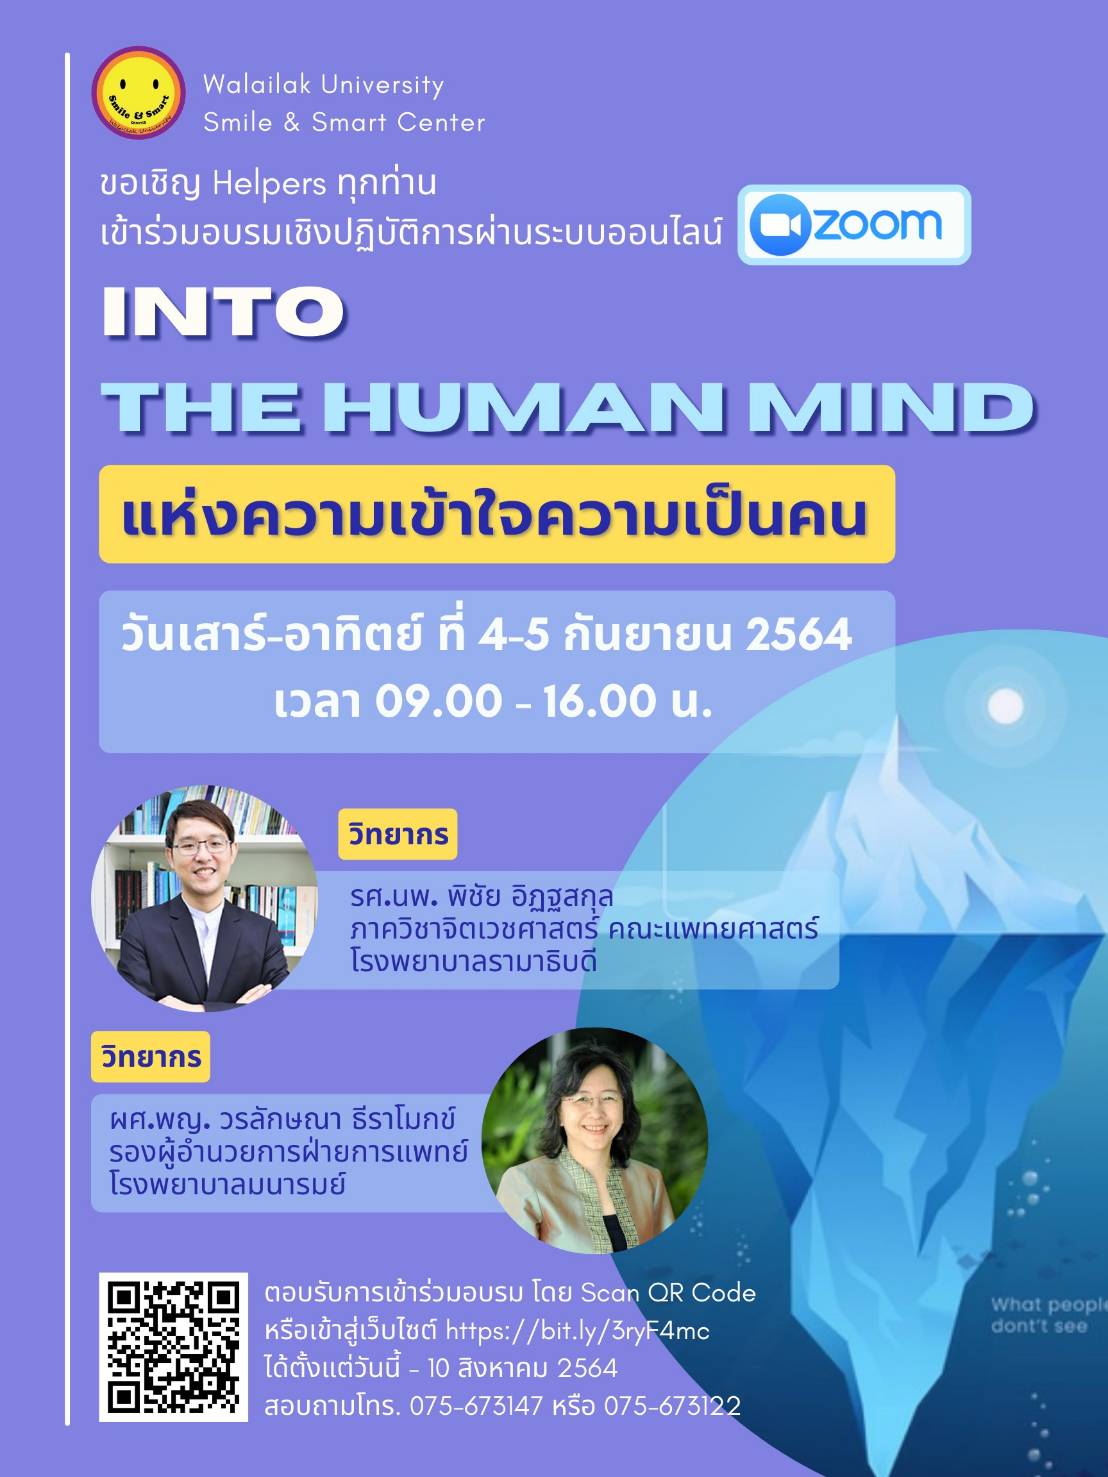 Smile & Smart Center Organizes an Online Trainning and Workshop Course : "Into the Human Mind"